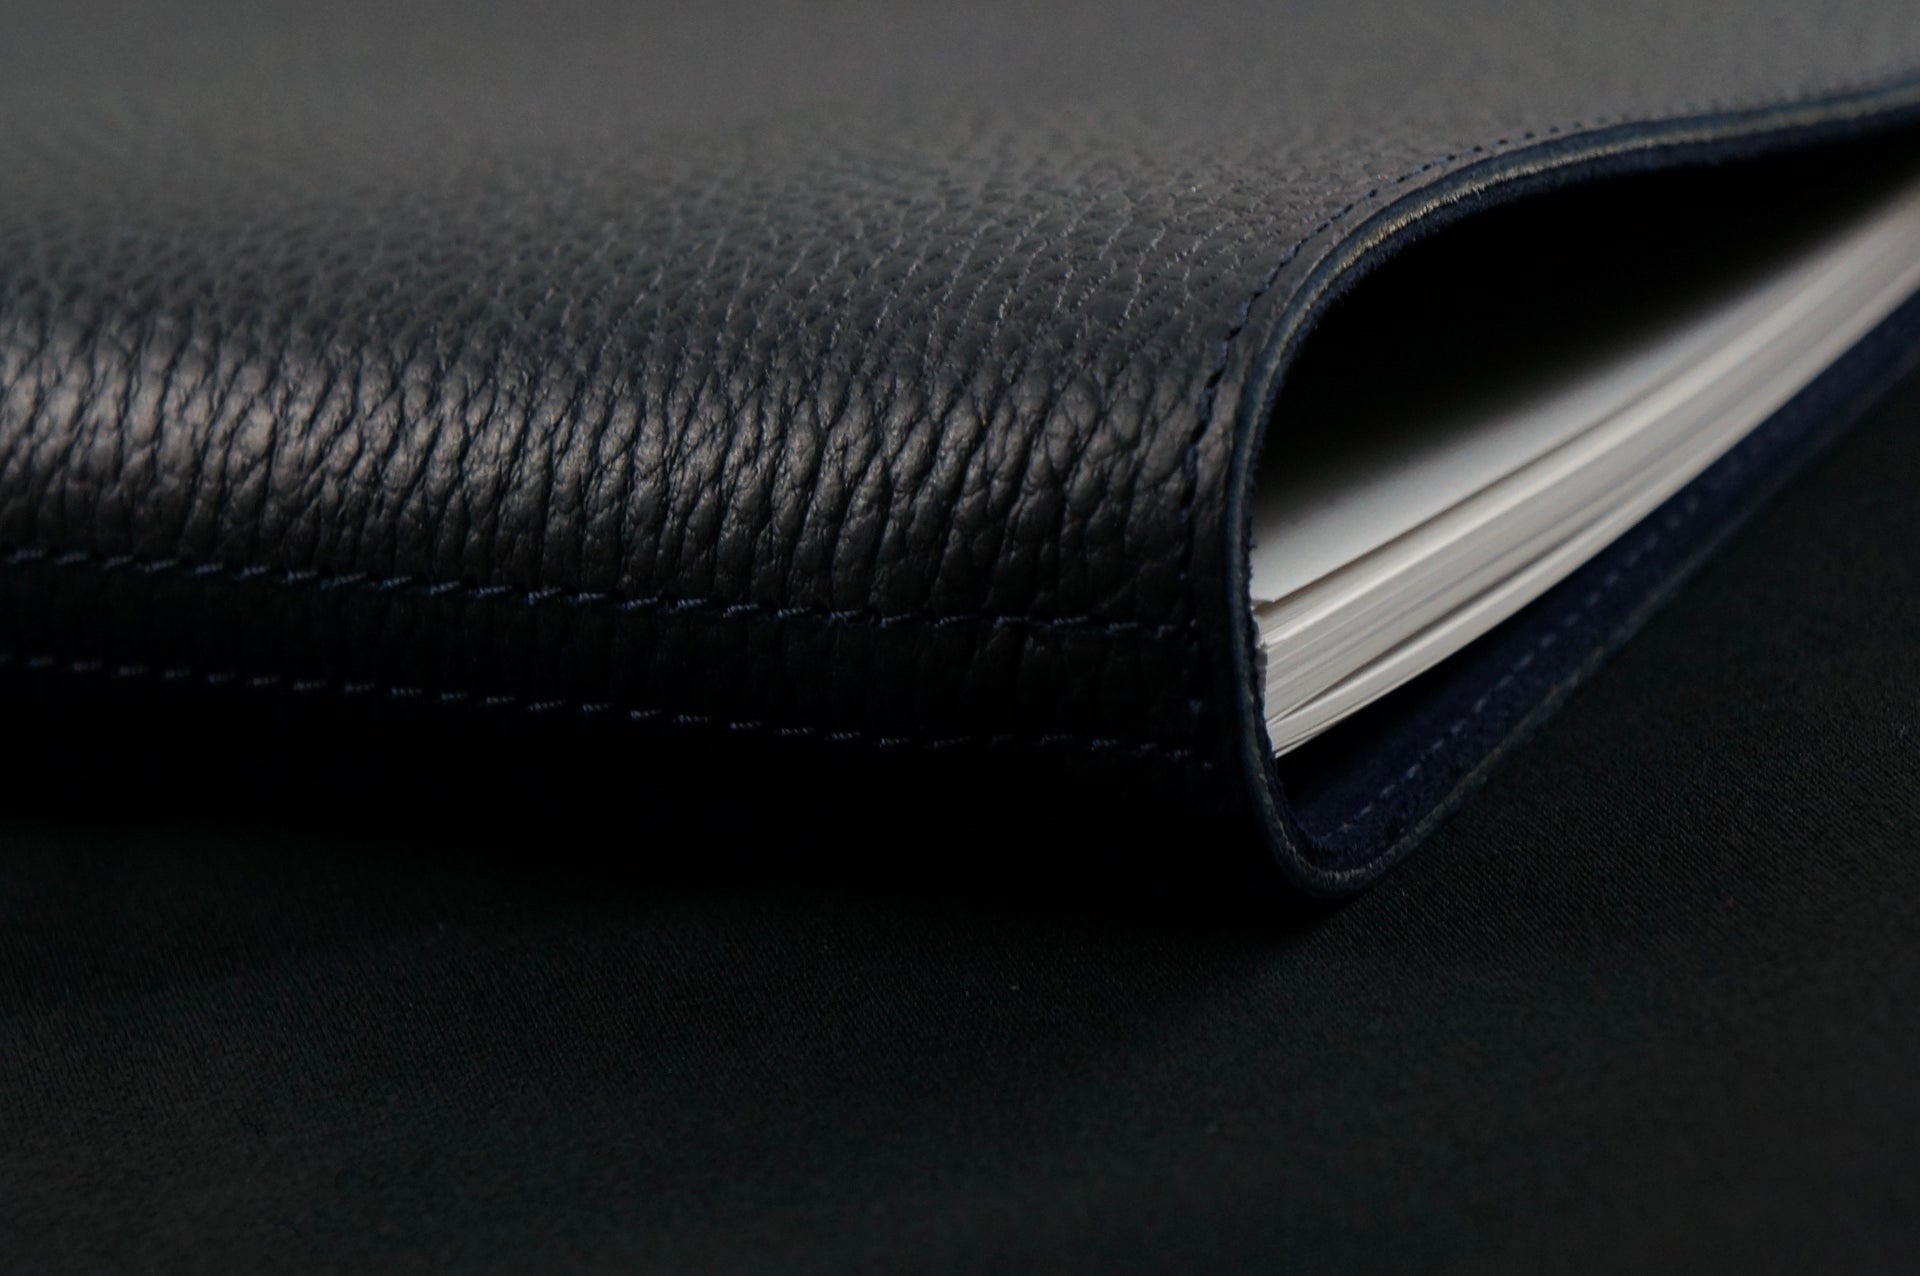 Luxury A5 Leather Notebooks - William Hannah Limited